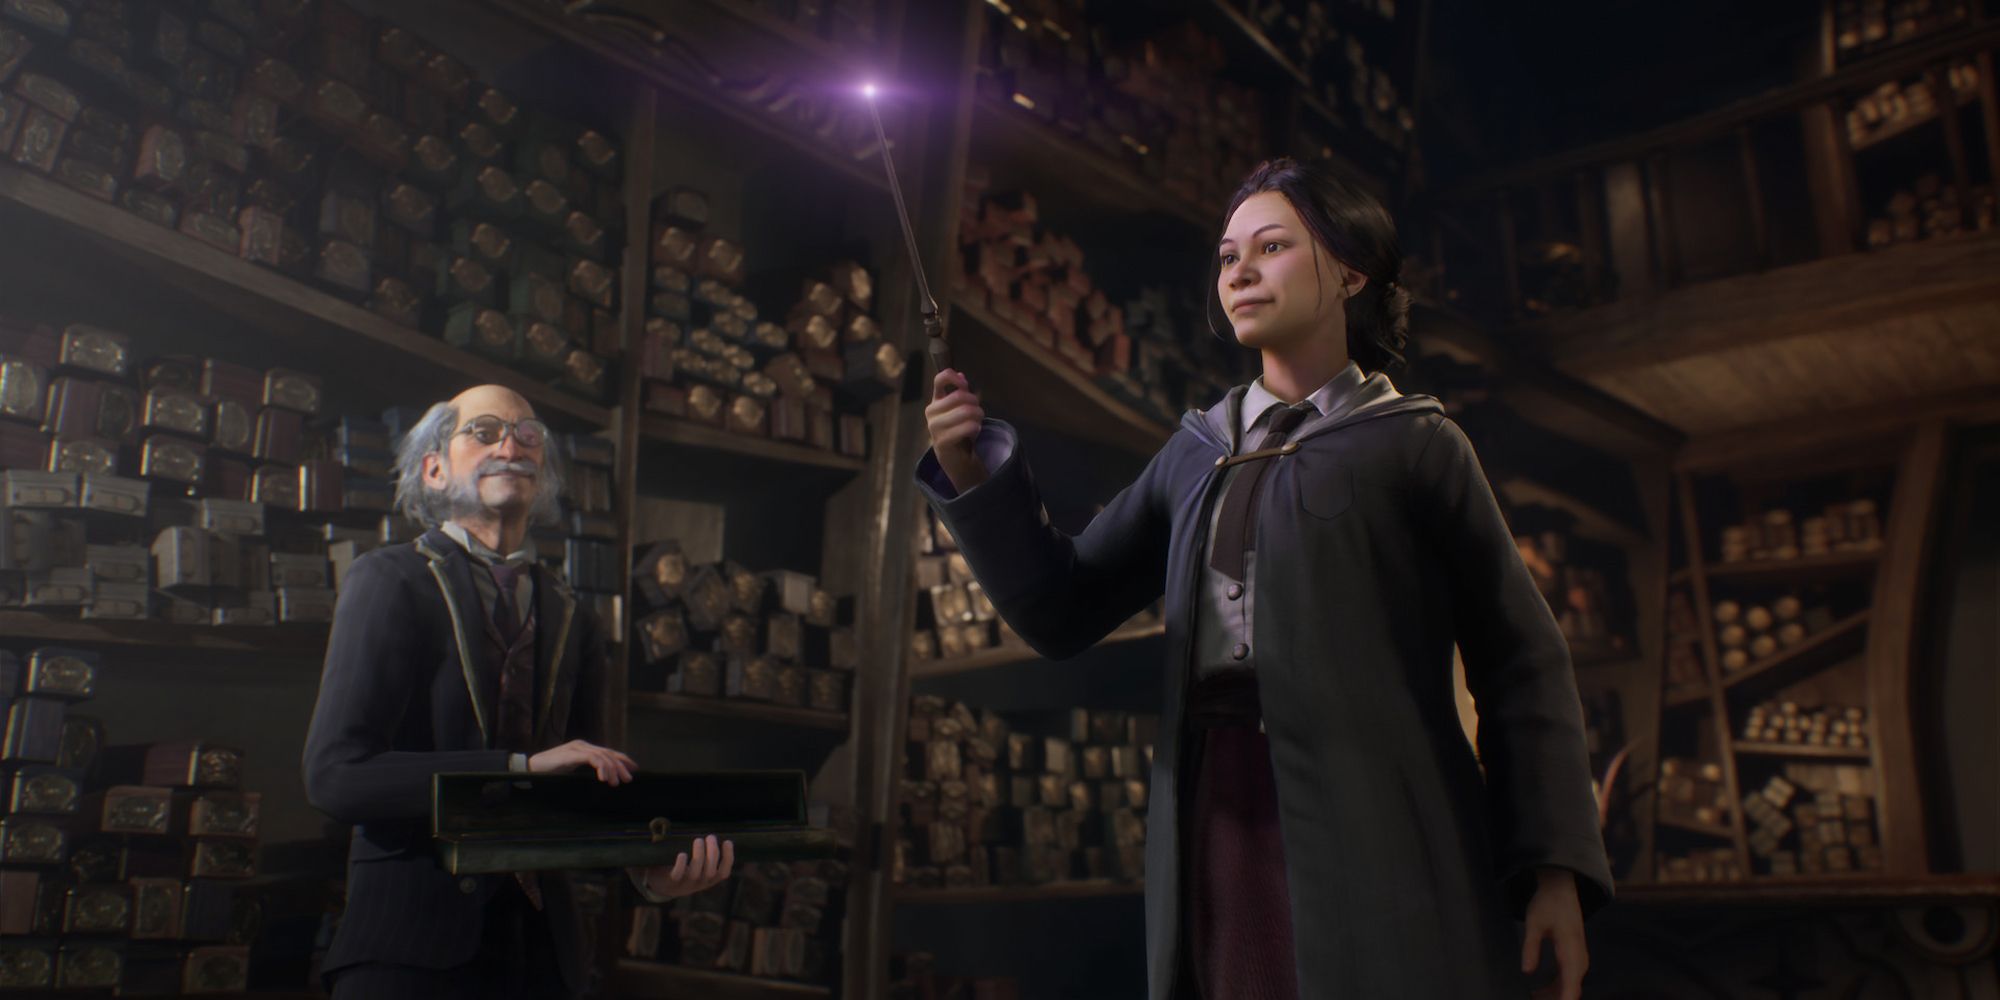 Hogwarts Legacy' Is Ranked Number One on Steam's Wishlist Charts